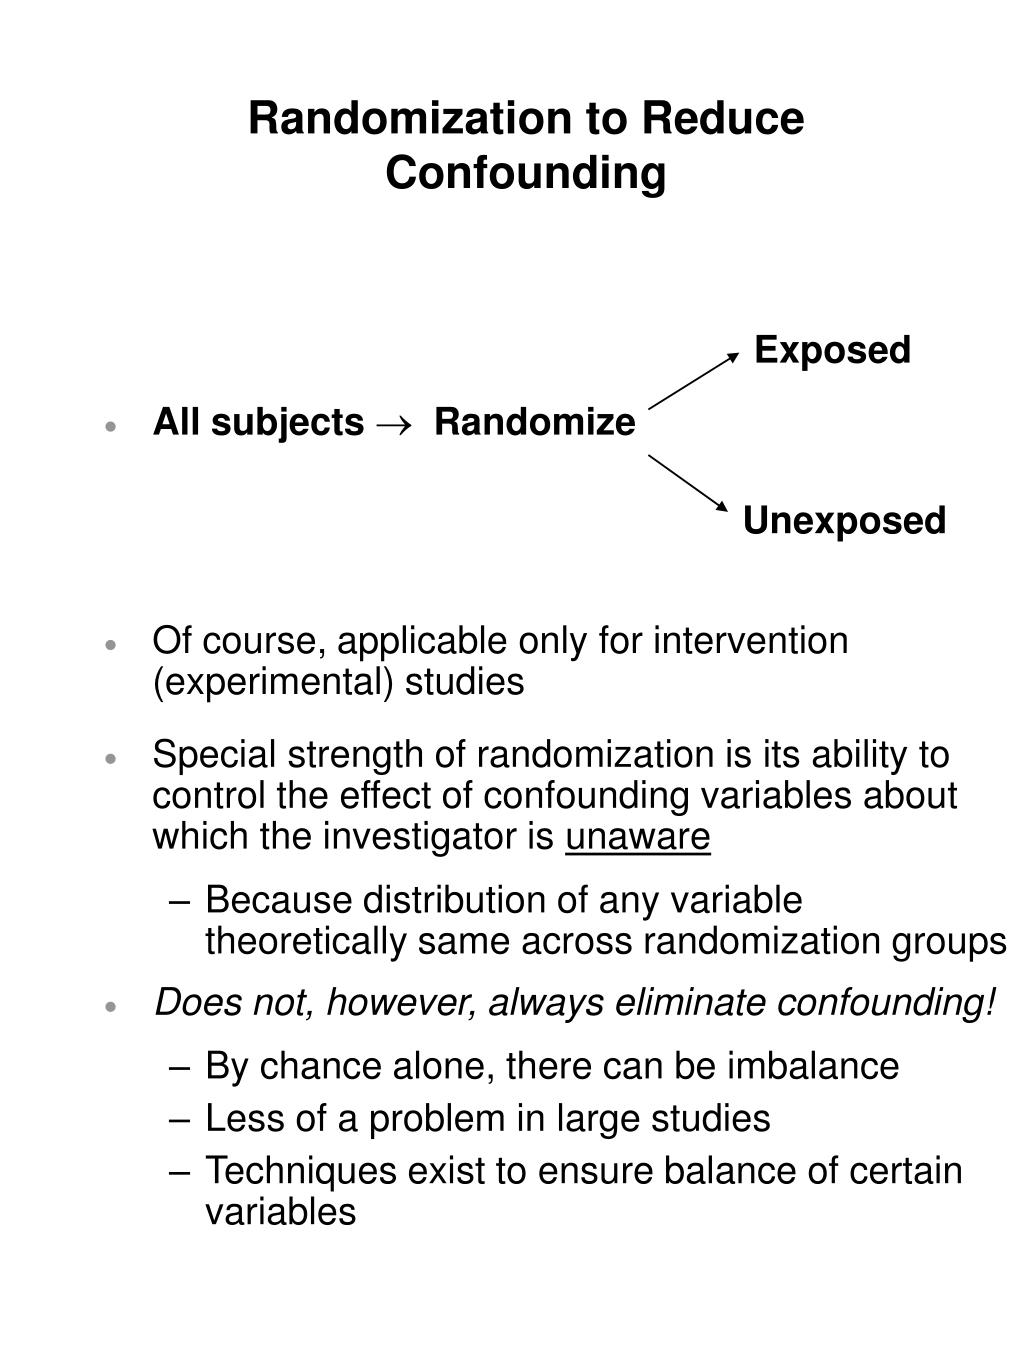 does random assignment reduce confounding variables